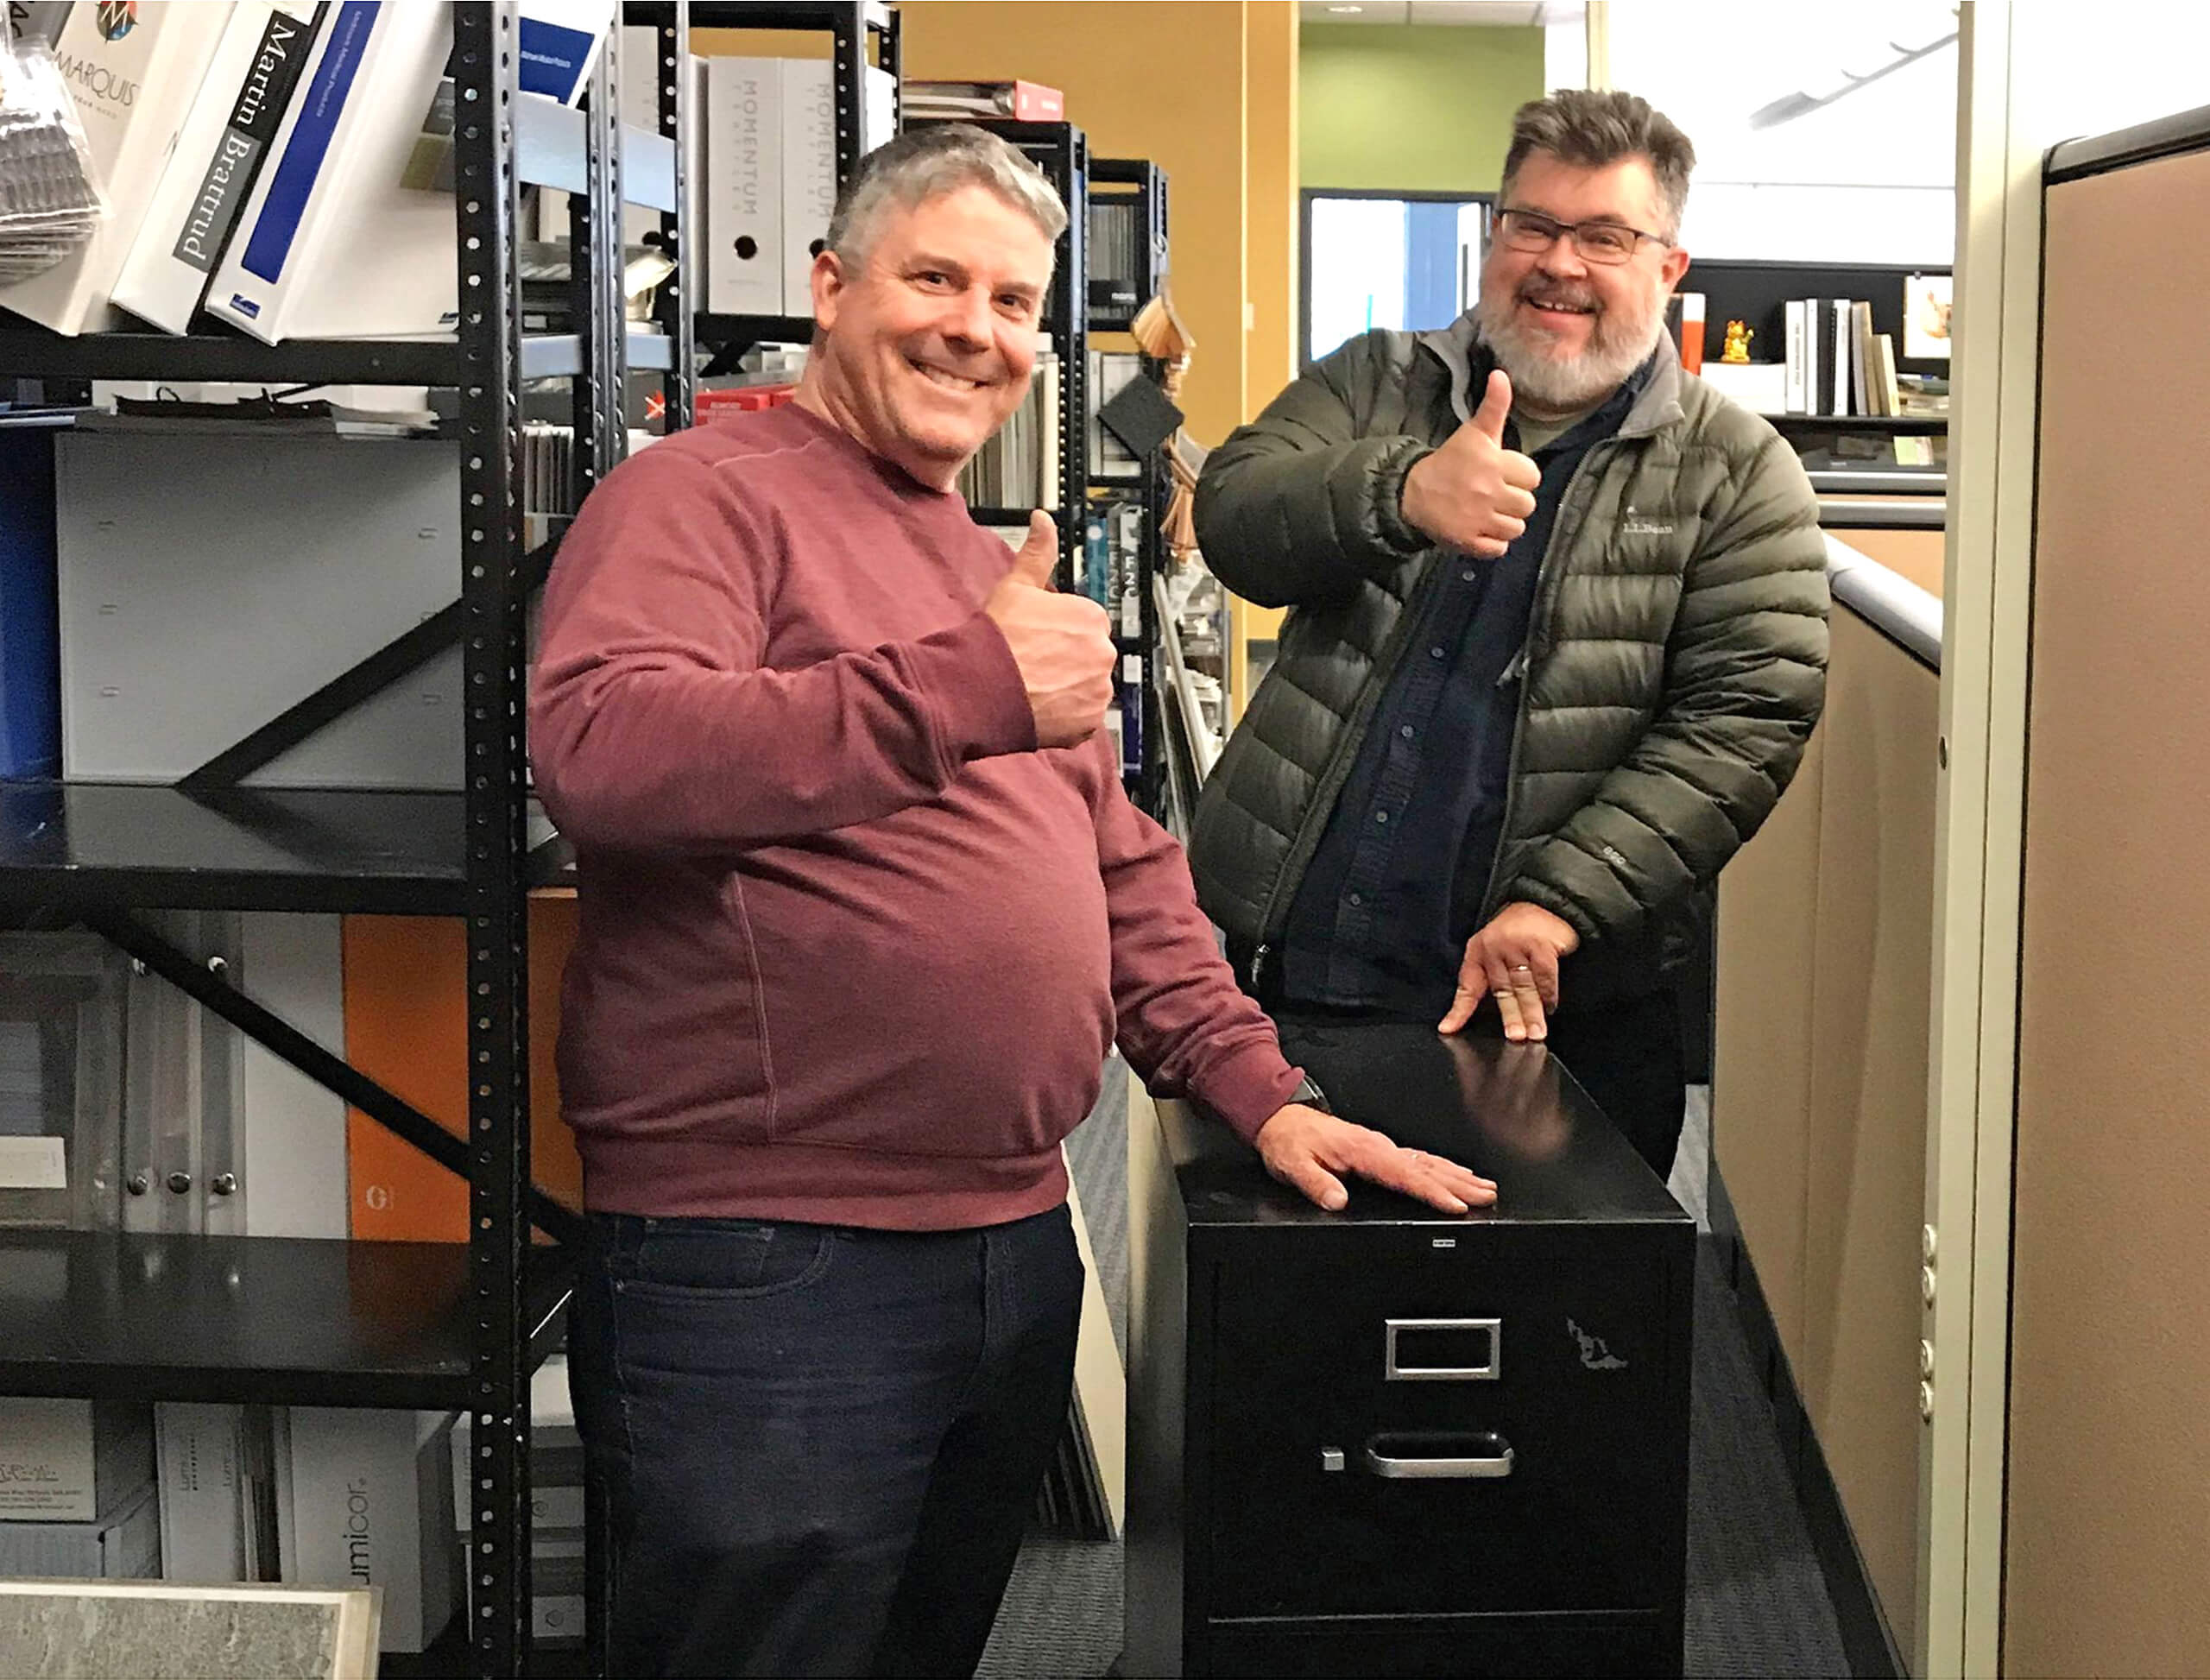 Two men are smiling and giving the thumbs up sign as they are touching a small black filing cabinet in an office environment.